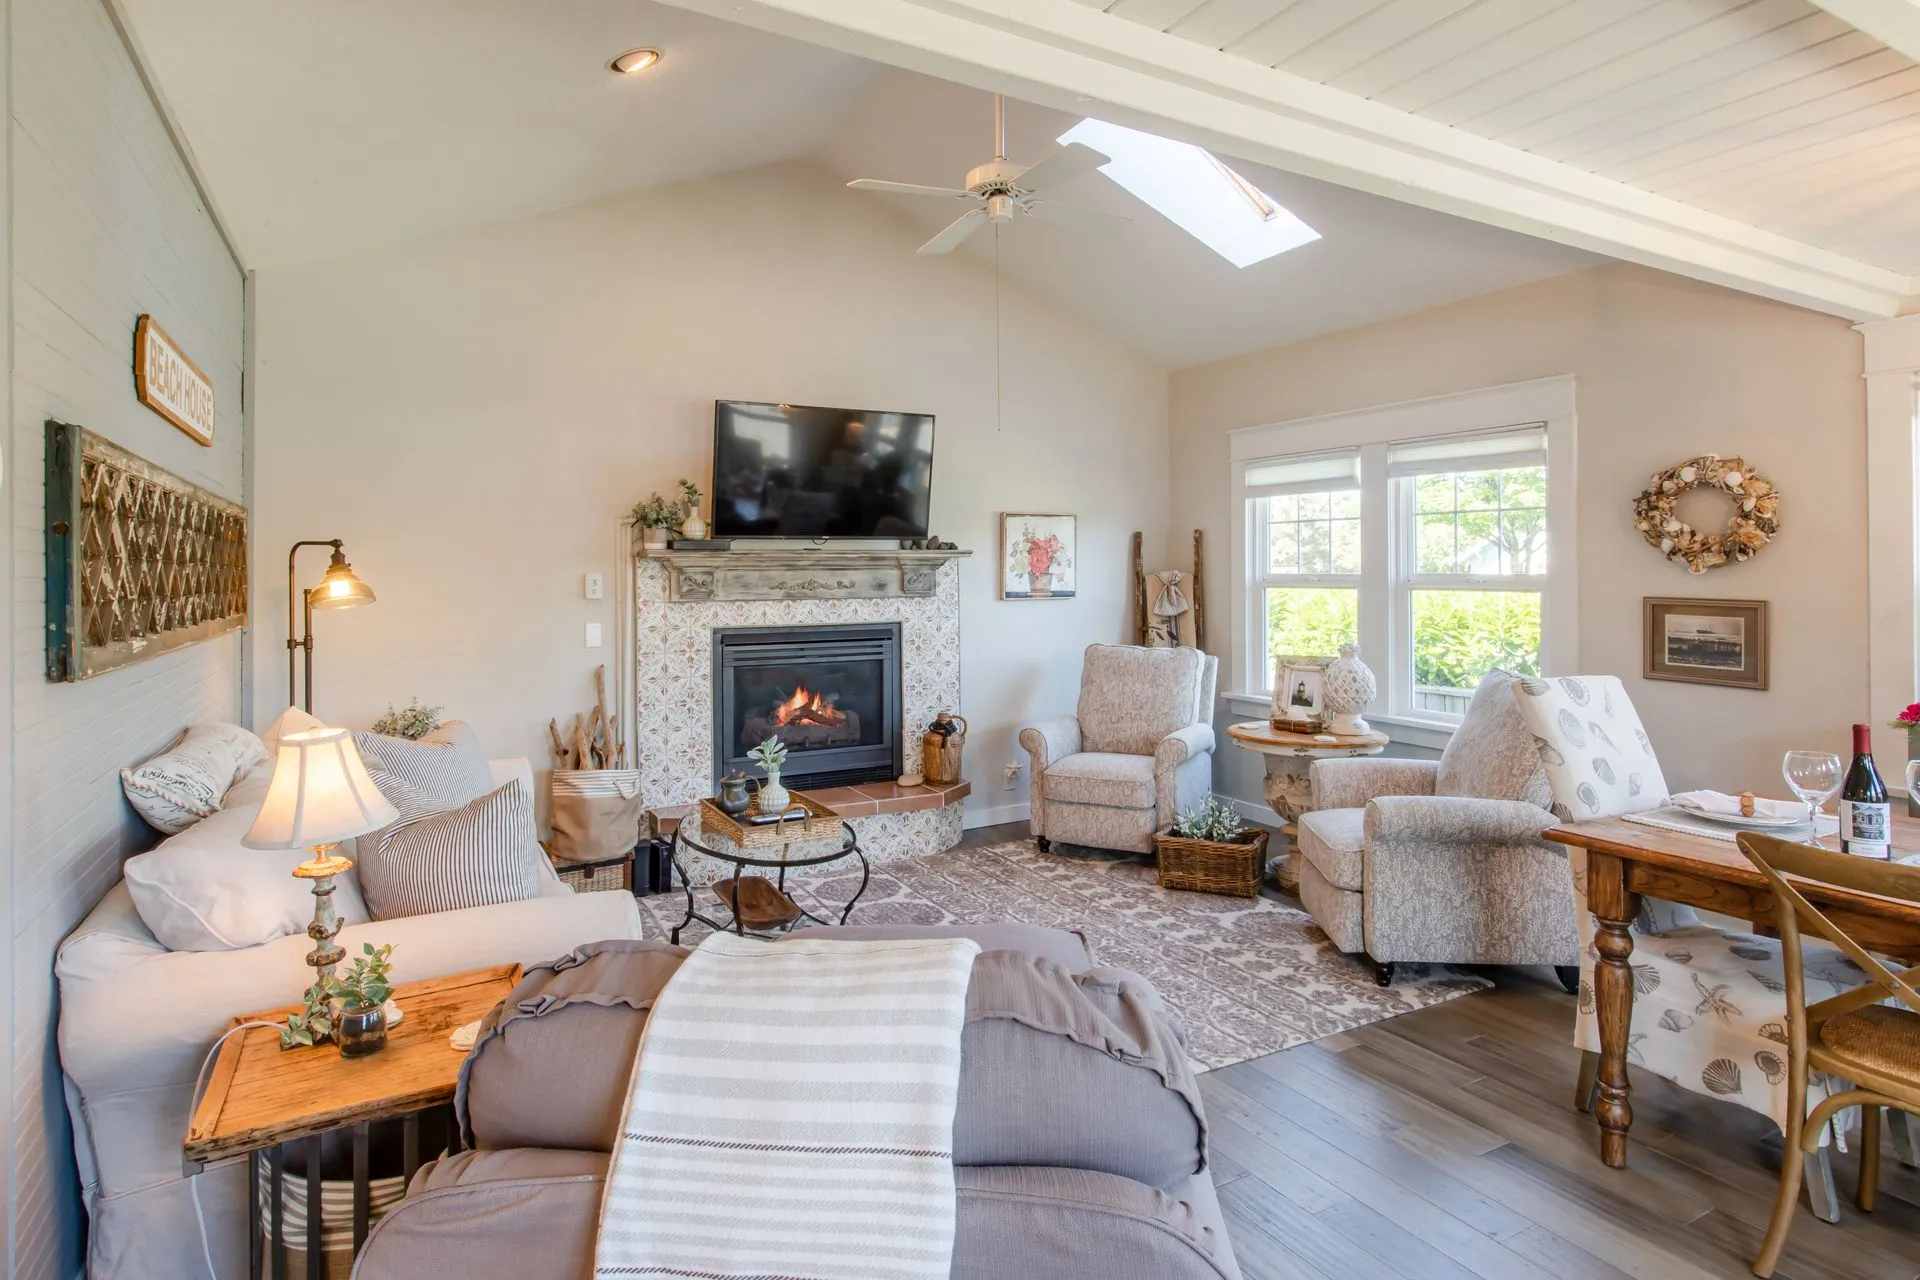 Vacation Rental in Cannon Beach, Red Door Cottage living room with couch, armchairs, fireplace and TV.